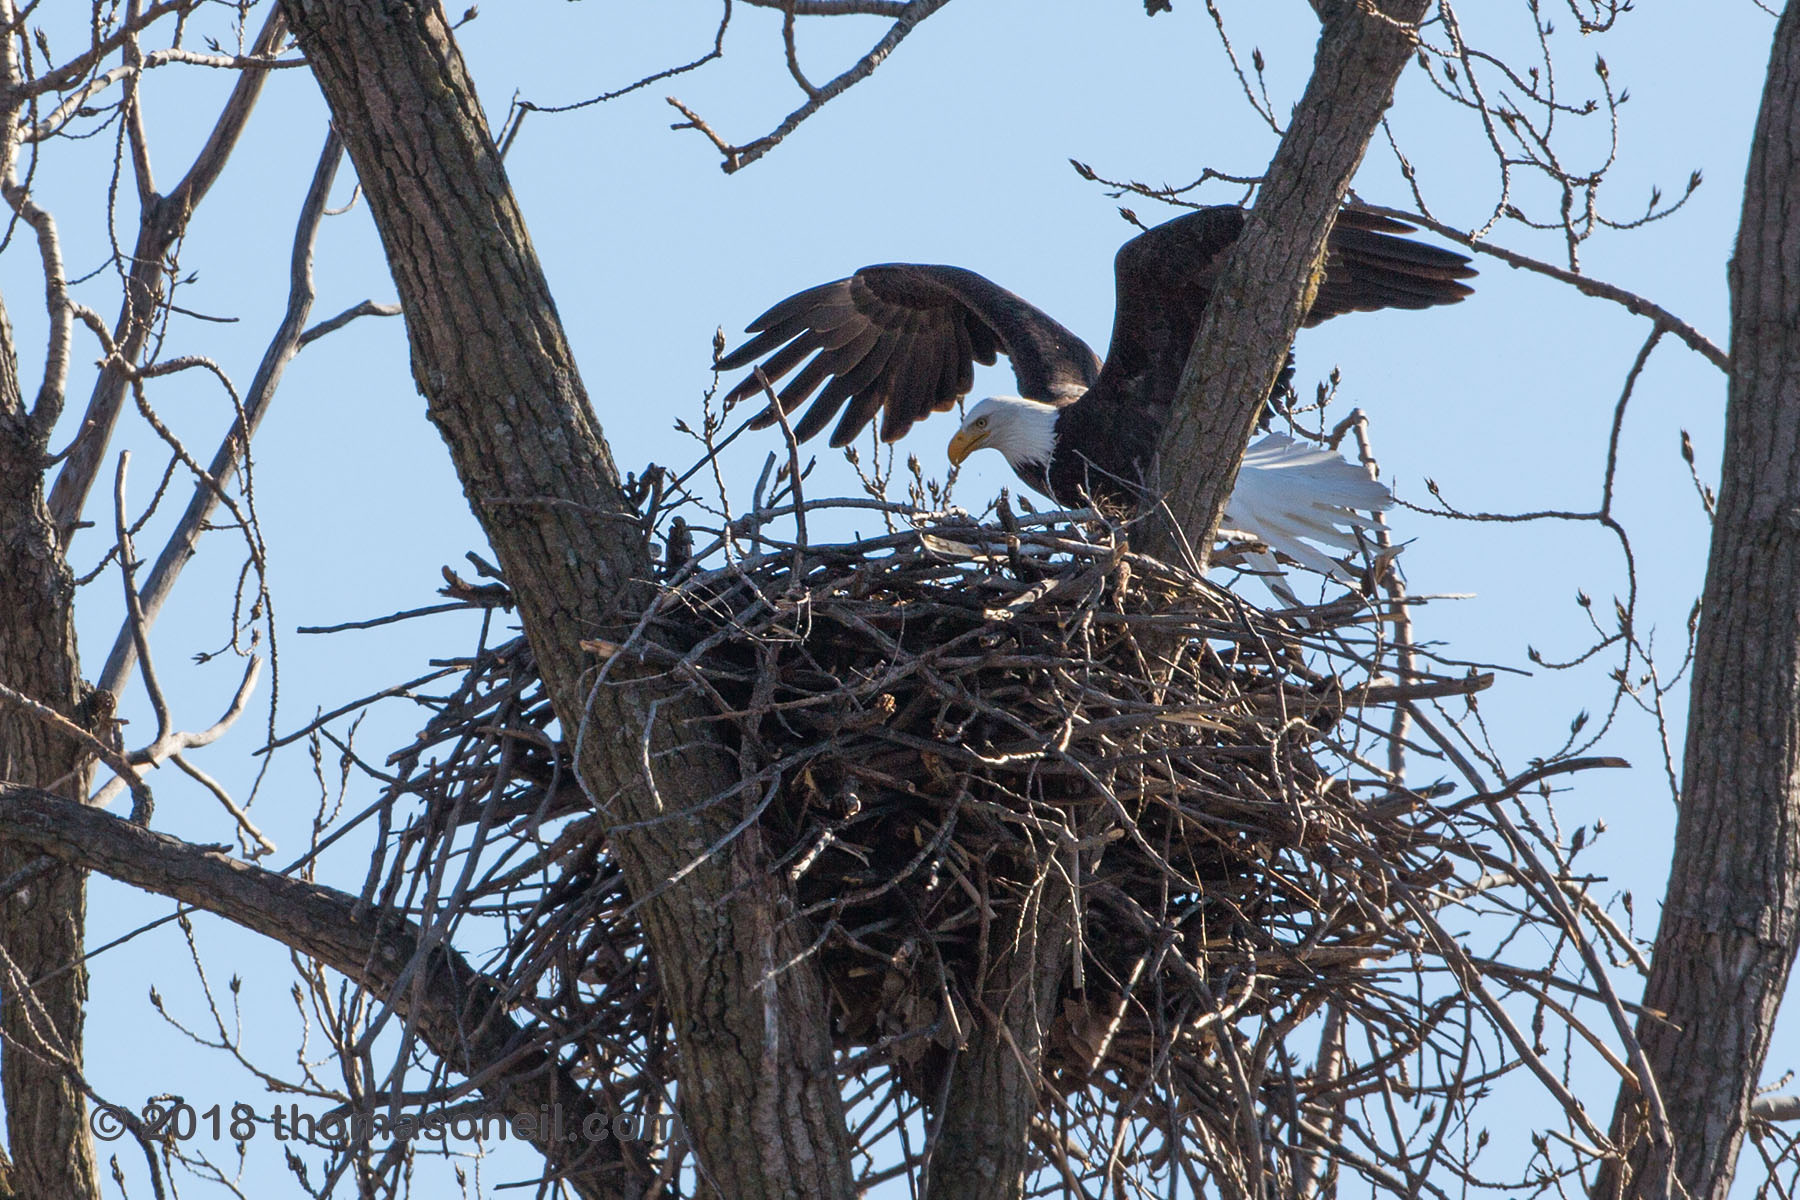 Bald eagle lands in the nest, Loess Bluffs National Wildlife Refuge, Missouri.  Click for next photo.